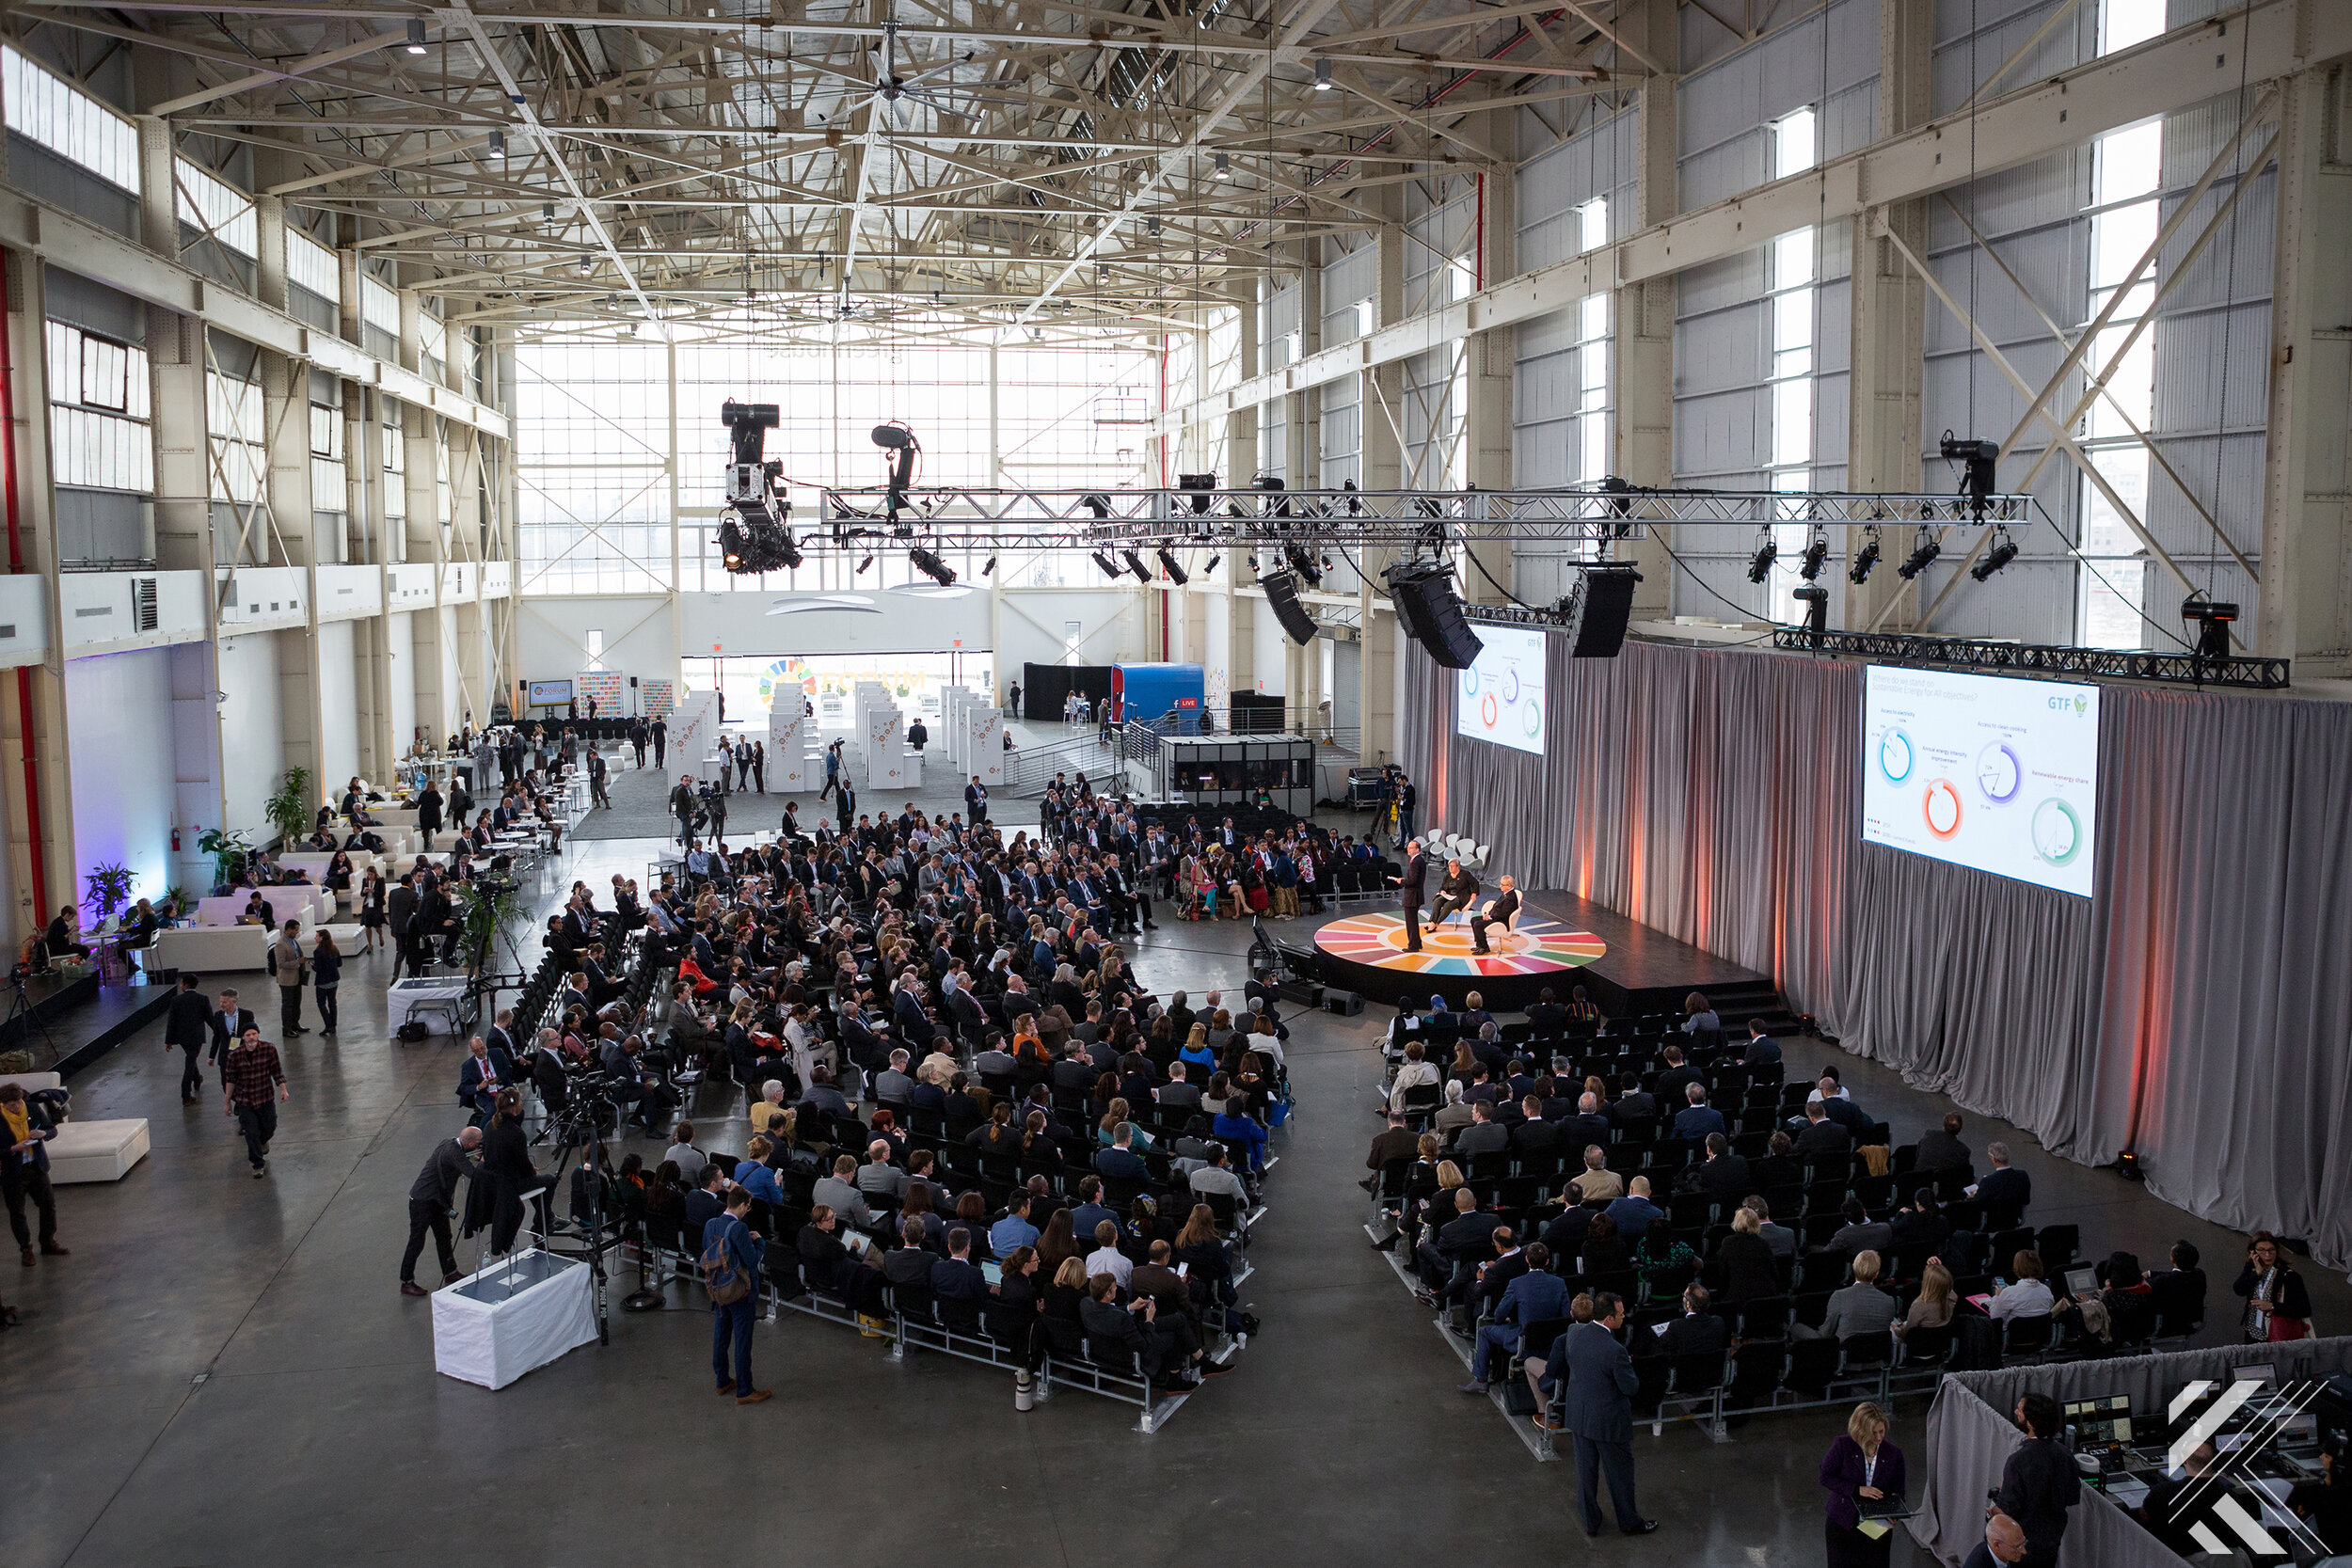 Large indoor conference space